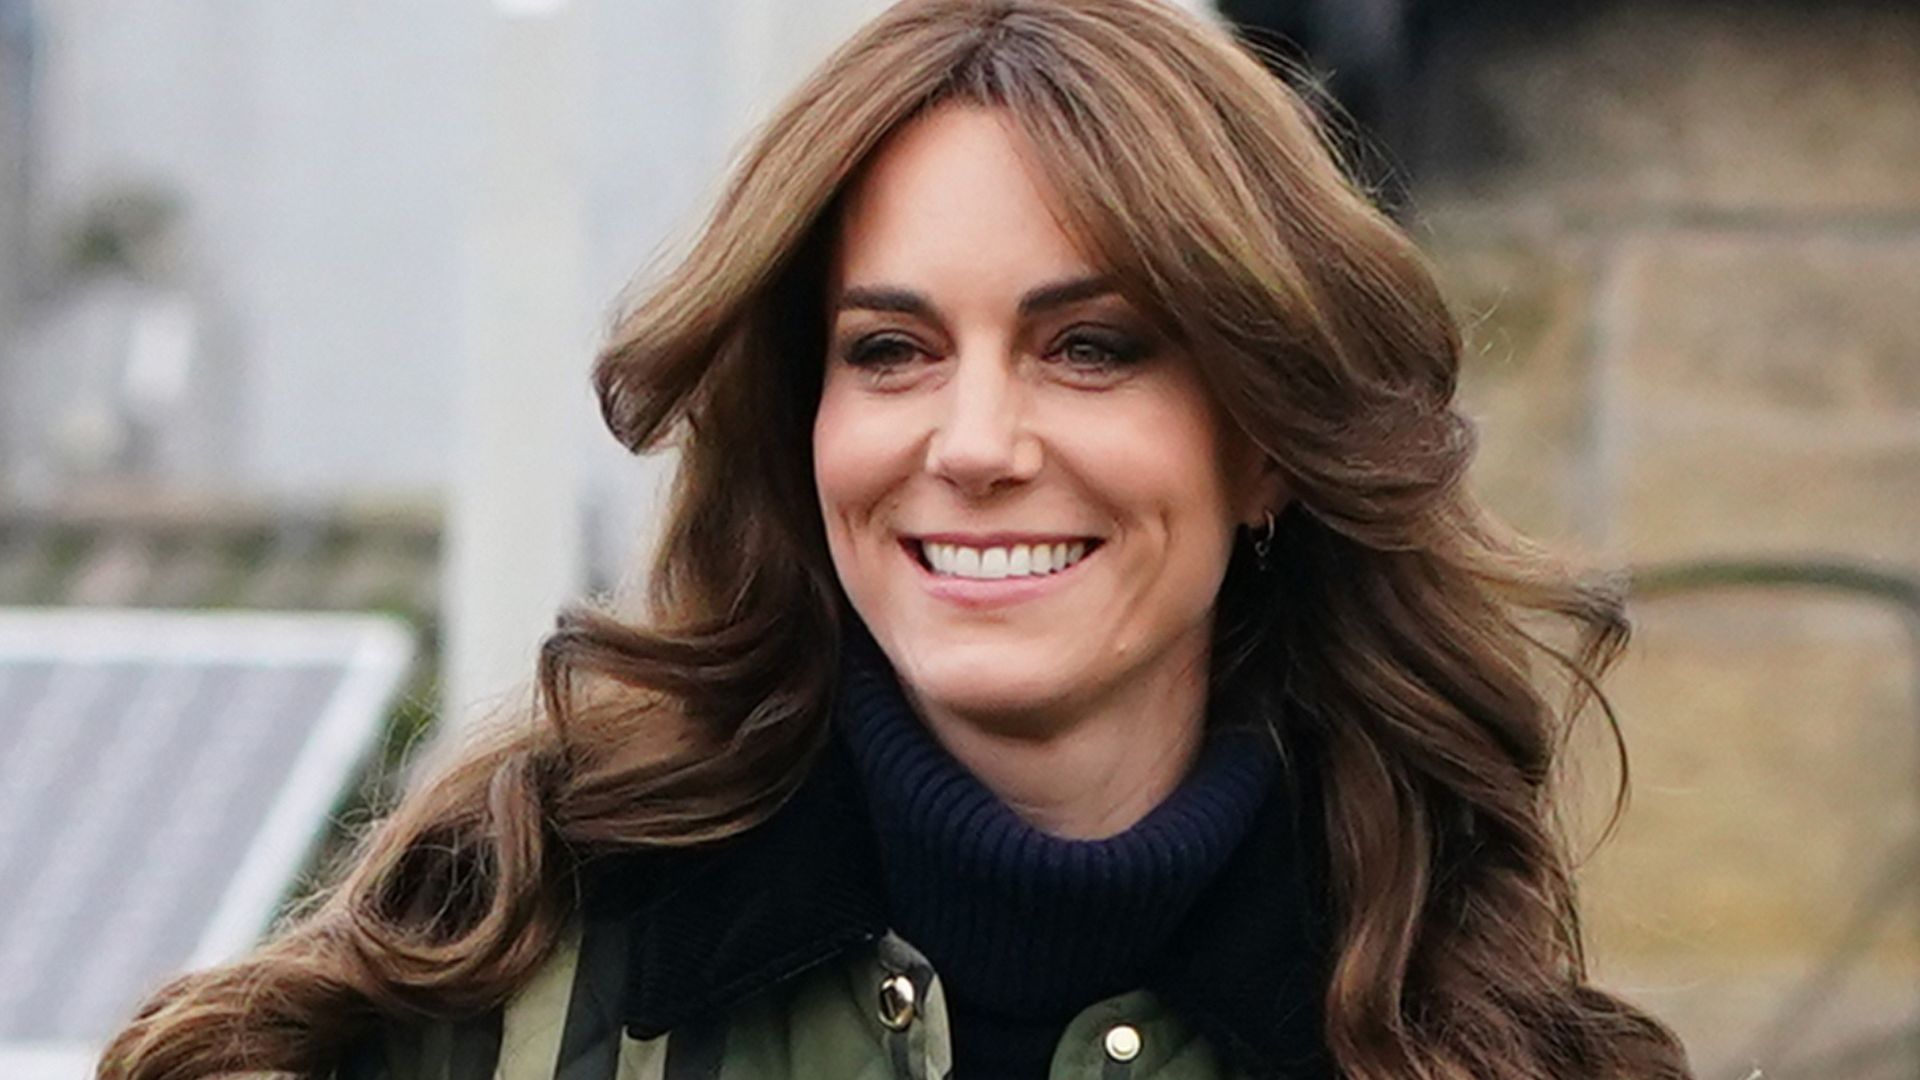 Kate Middleton seen for the first time since December, as she goes for ...